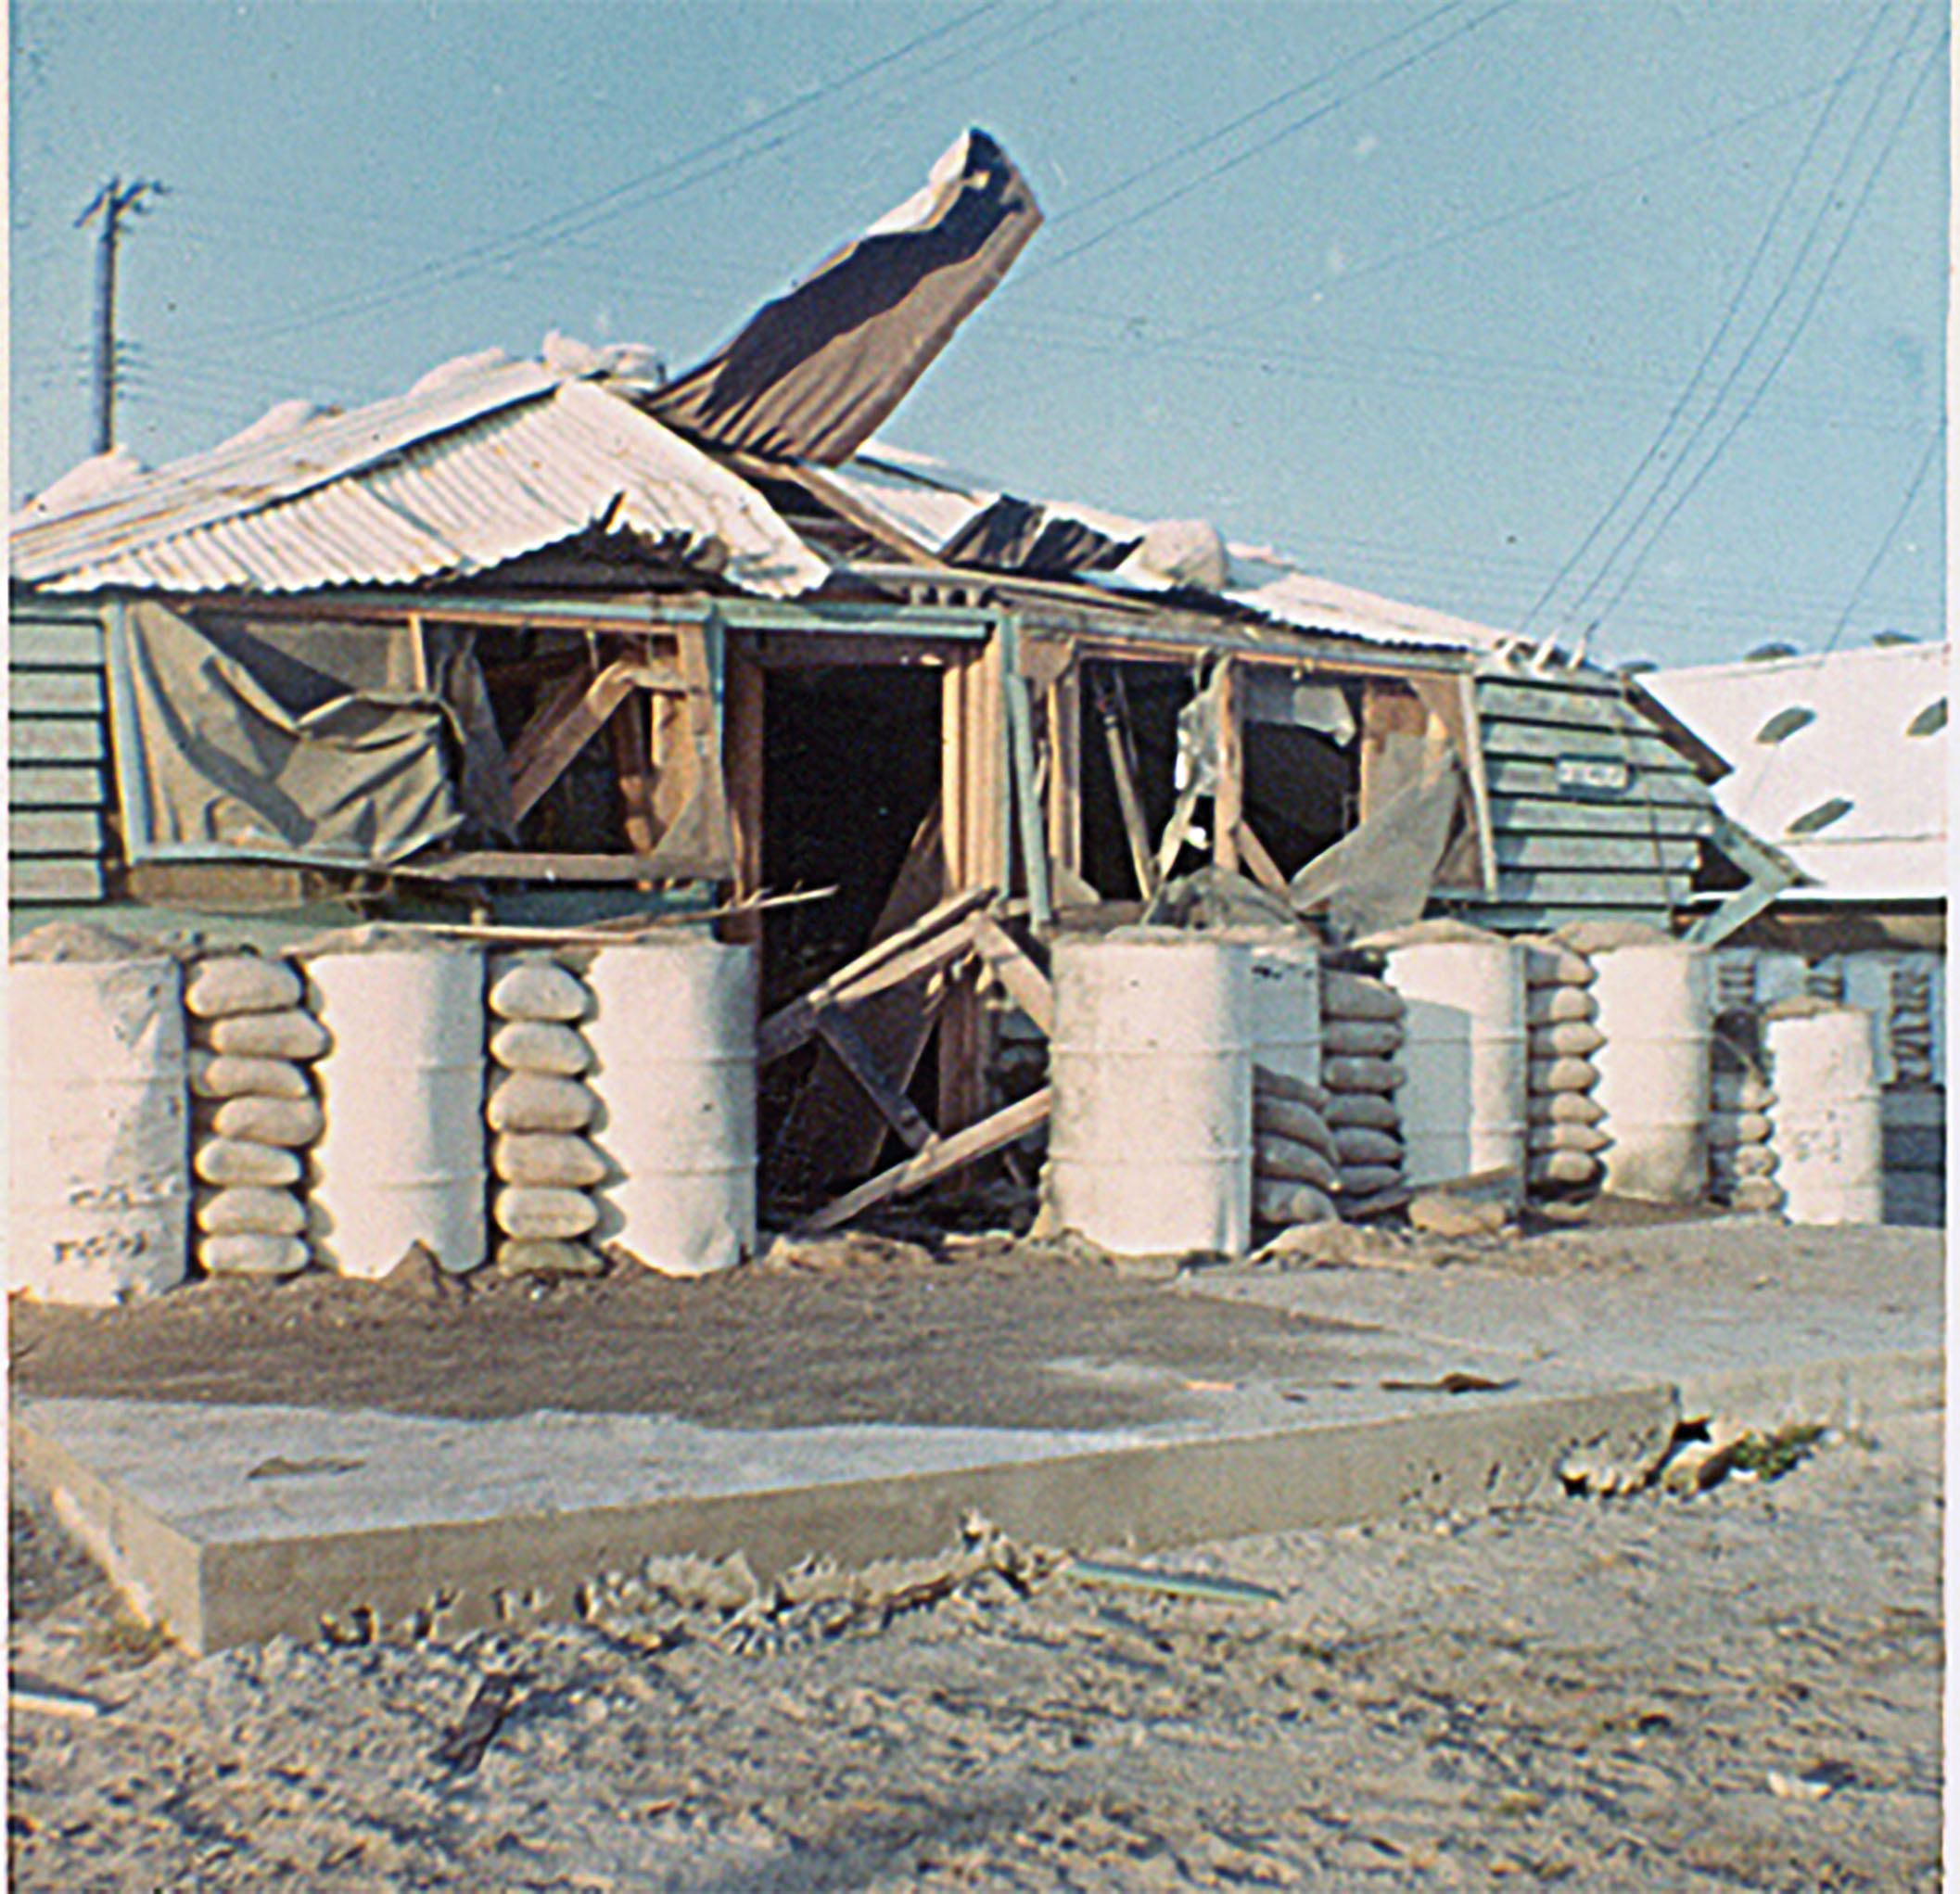 The damage wreaked by the sappers at Dong Ba Thin included the destruction of living quarters that housed two captains of the 183rd Aviation Company. / Courtesy Jim McHaney